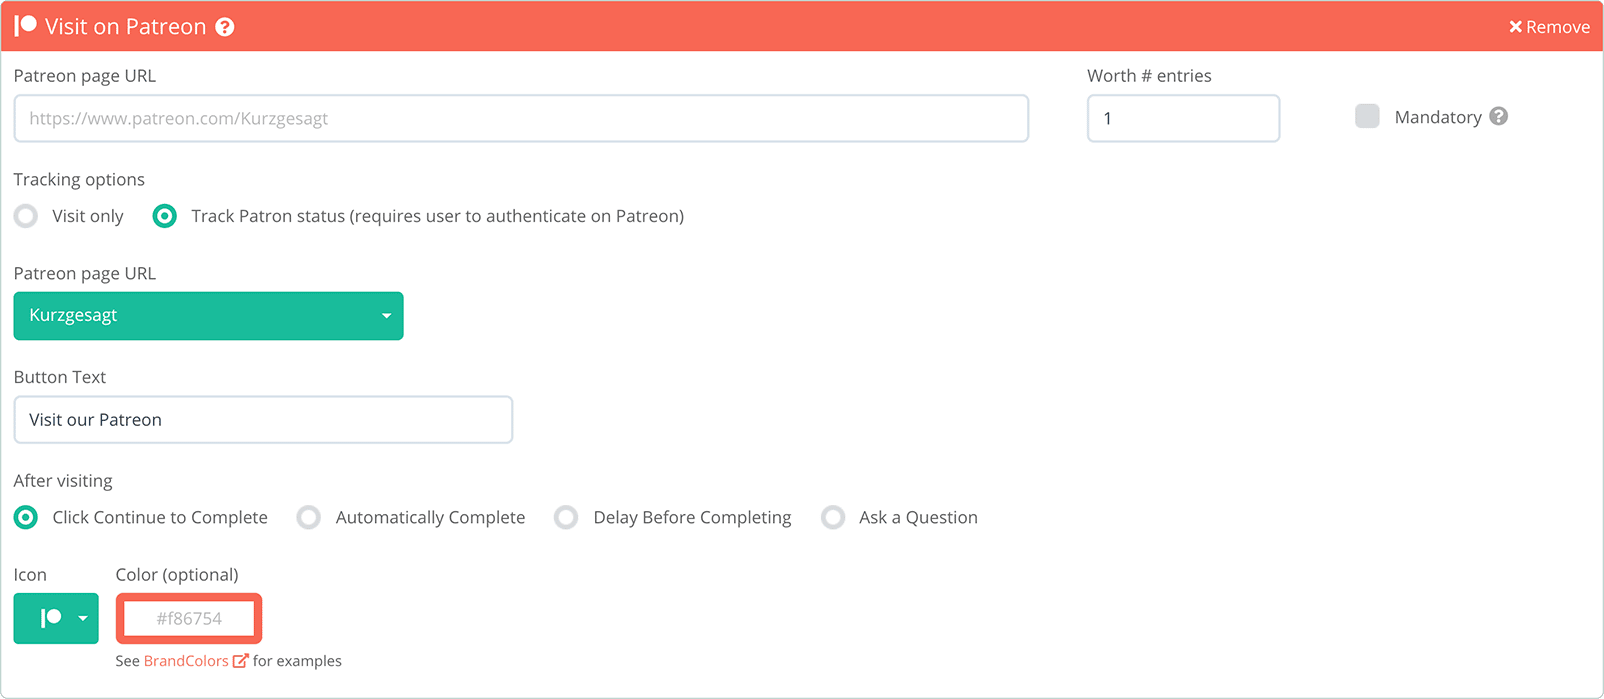 Select a Patreon page managed by you